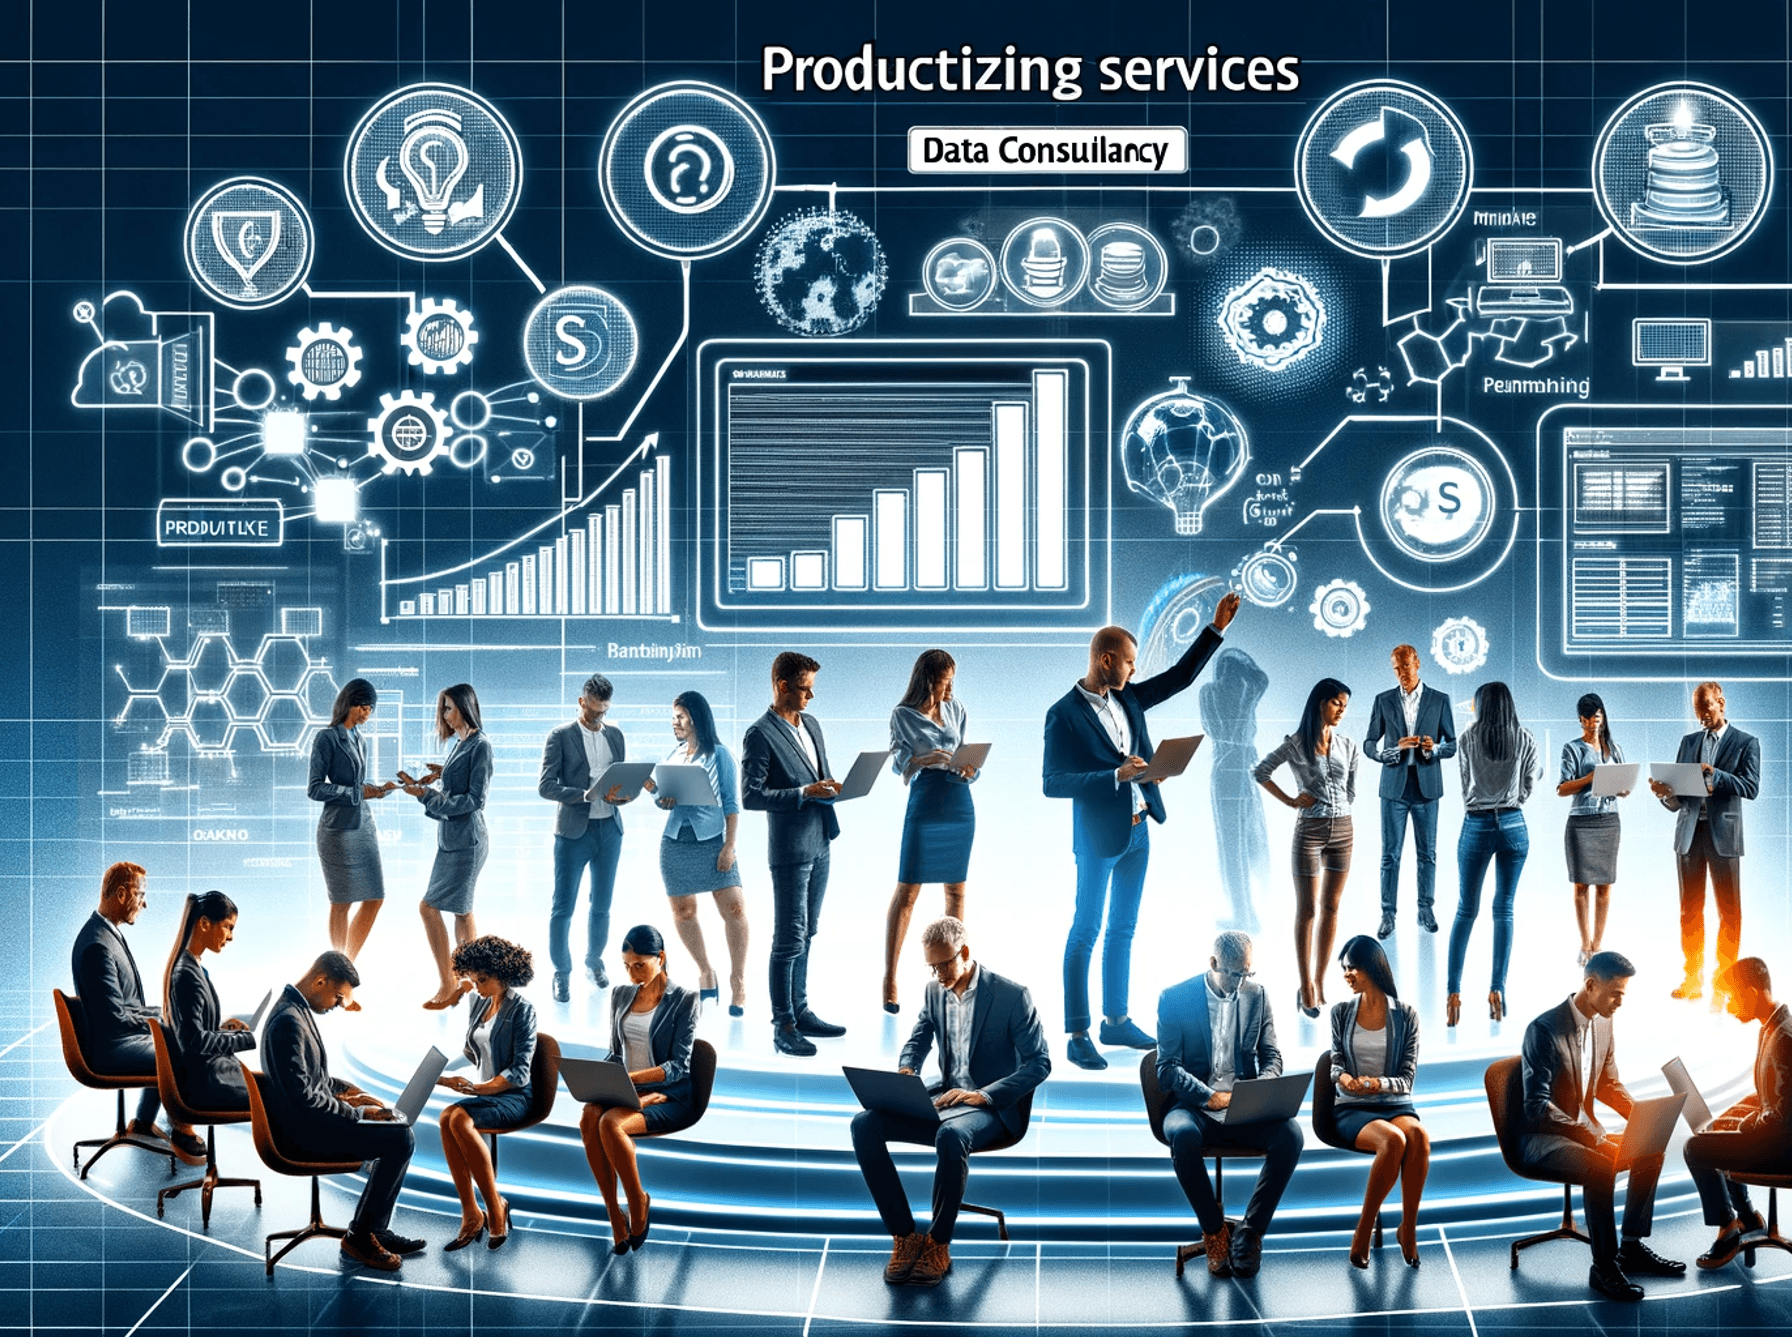 Data consultants, are you already productizing your services?